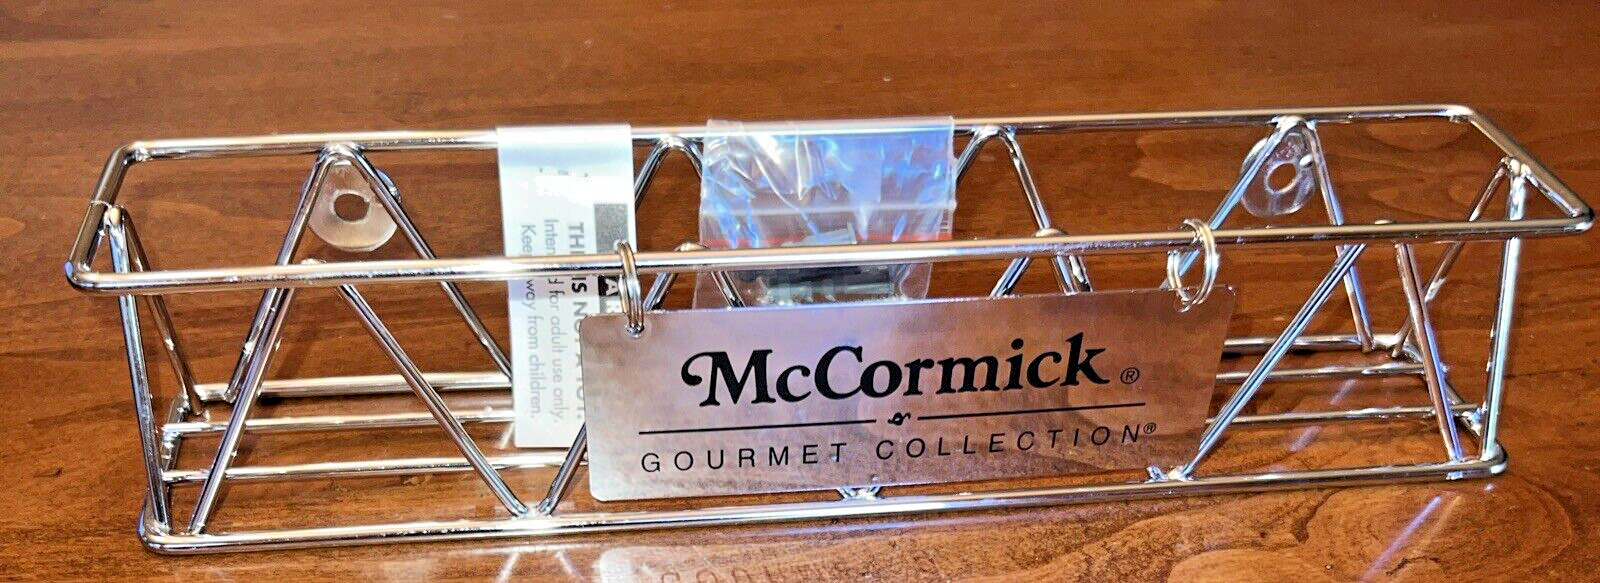 Vintage McCormick Gourmet Collection Spice Rack Silver Metal Chrome